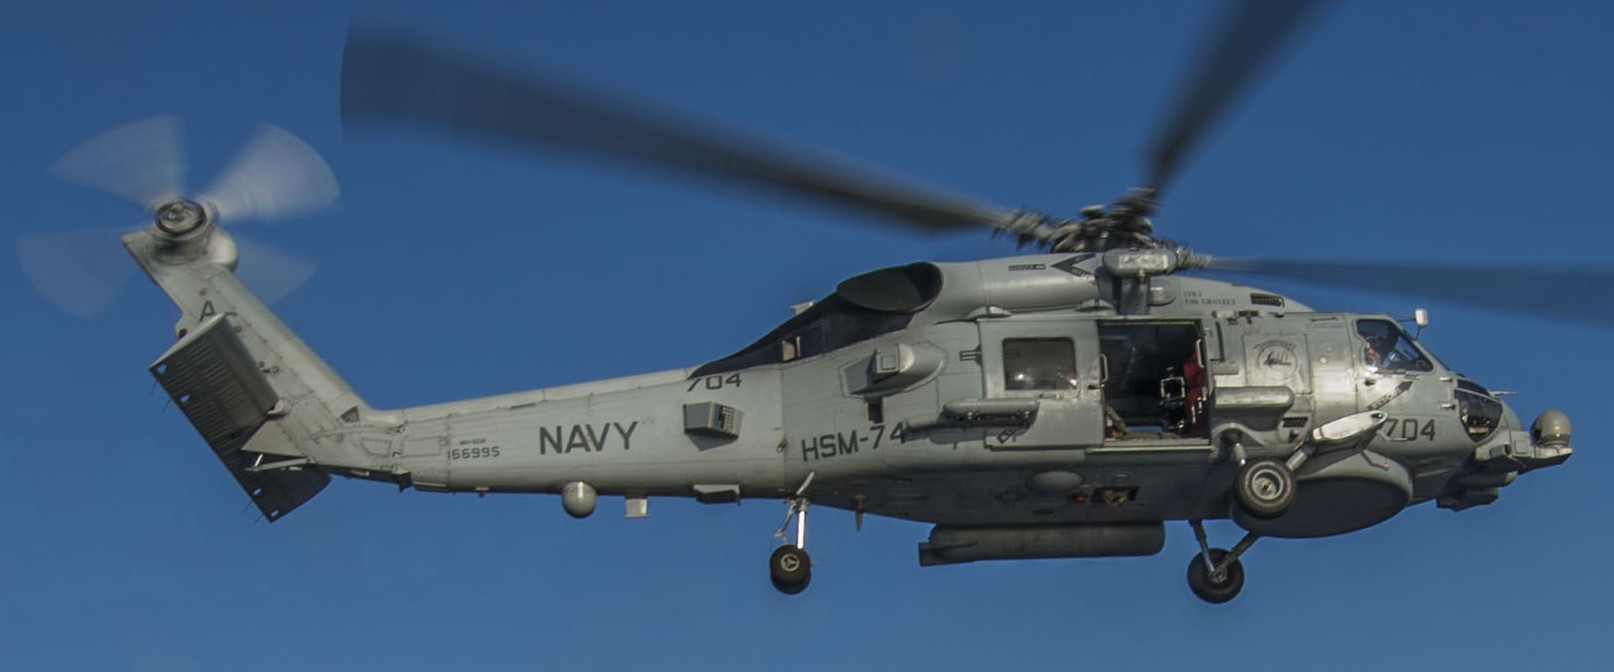 hsm-74 swamp foxes helicopter maritime strike squadron us navy mh-60r seahawk 2013 85